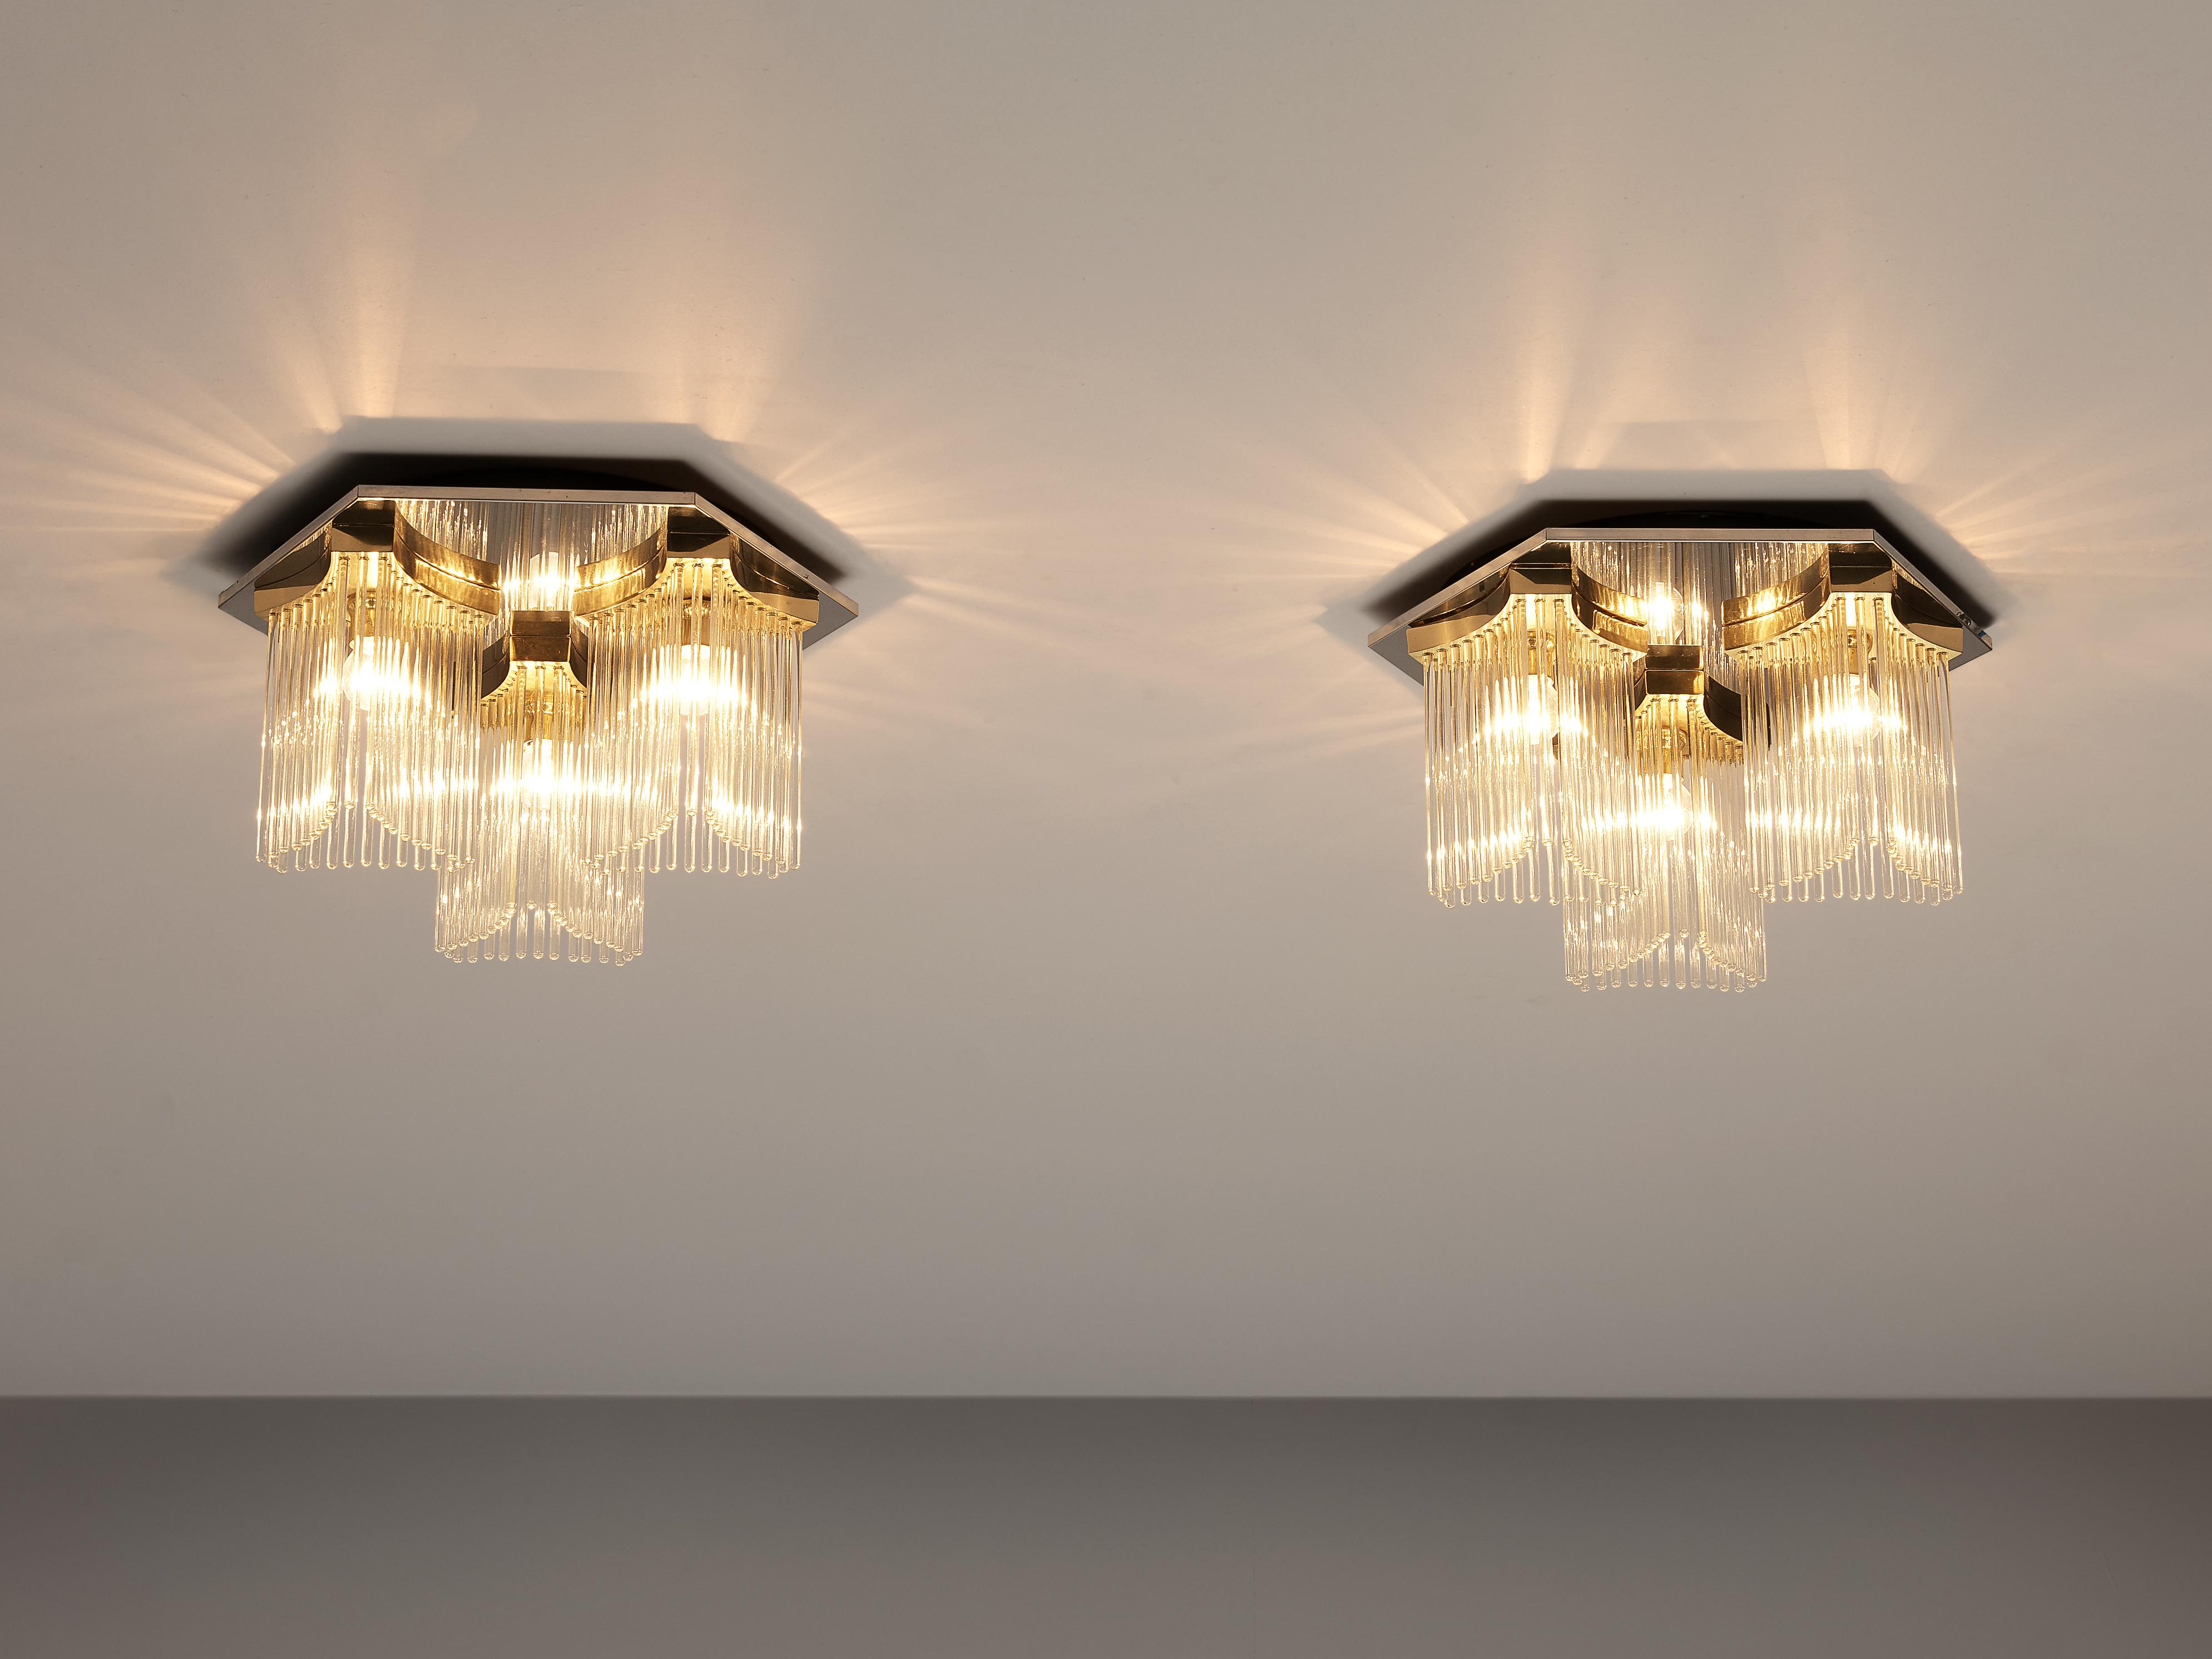 Gaetano Sciolari ceiling lights, glass, metal, Europe, 1980s

On a polygonal ceiling fixture are three light bulbs adjusted. These are surrounded by long glass sticks adjusted in wonderful shape. The light which shines through the separated glass